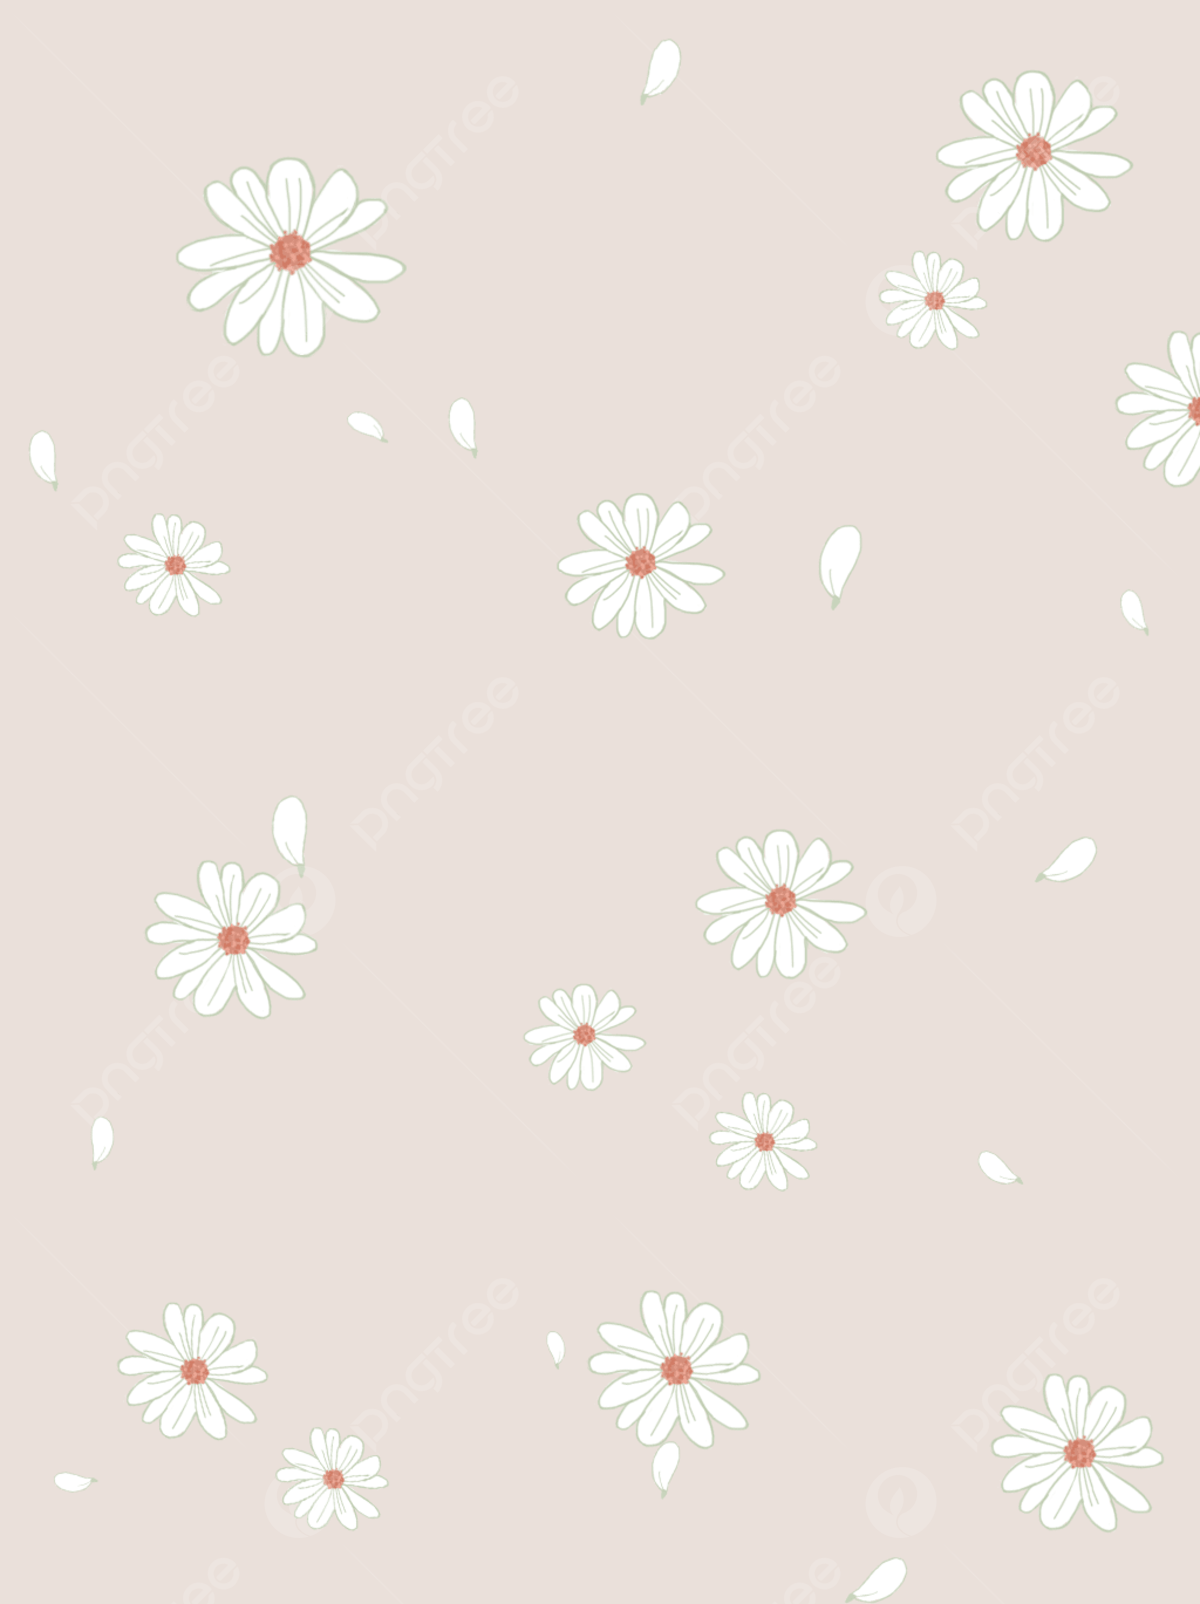 A seamless pattern of daisies on a light brown background - Daisy